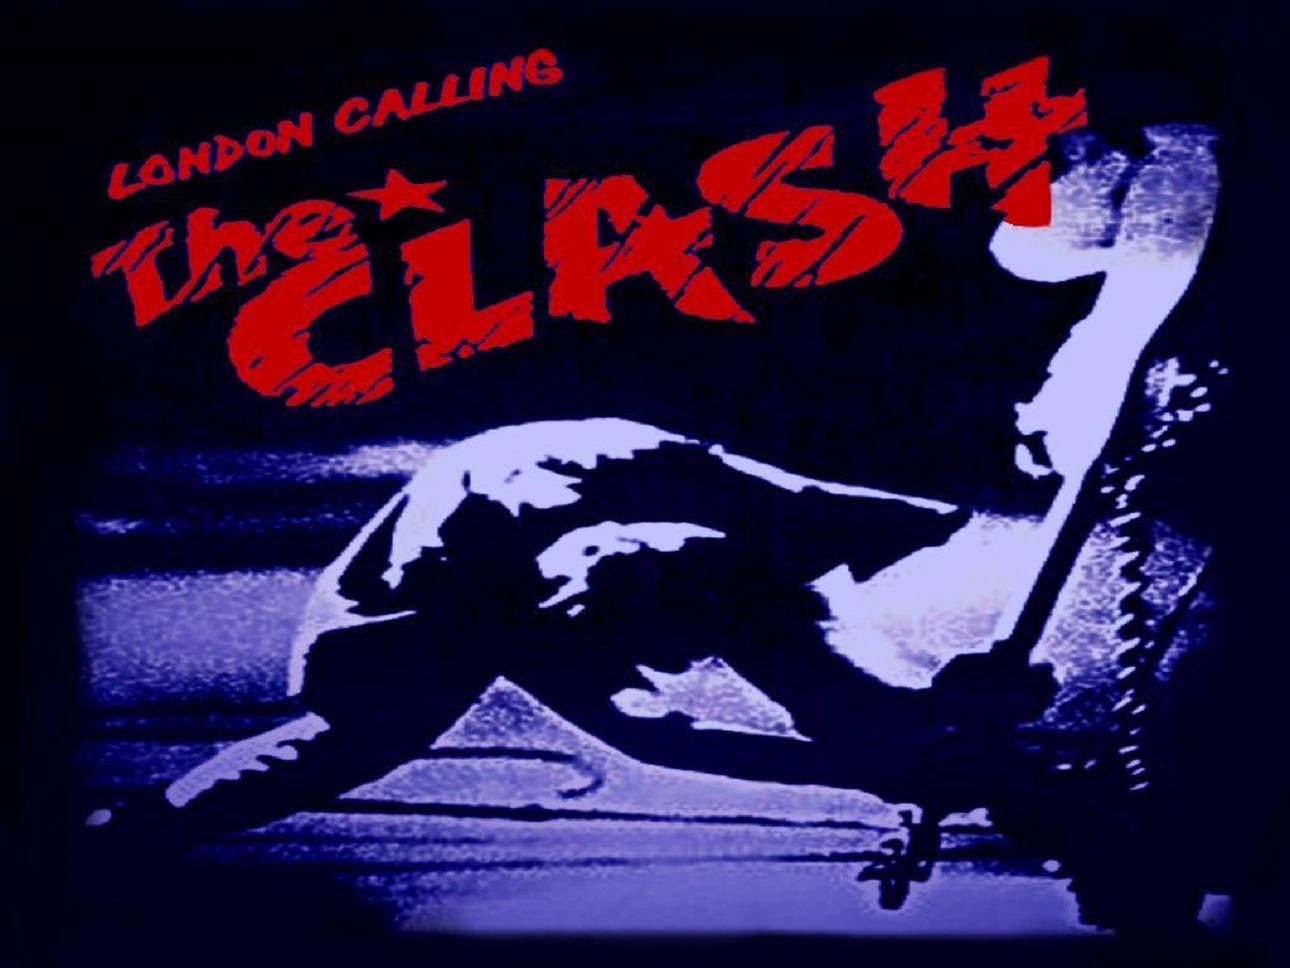 Iconic London Calling Album Cover By The Clash